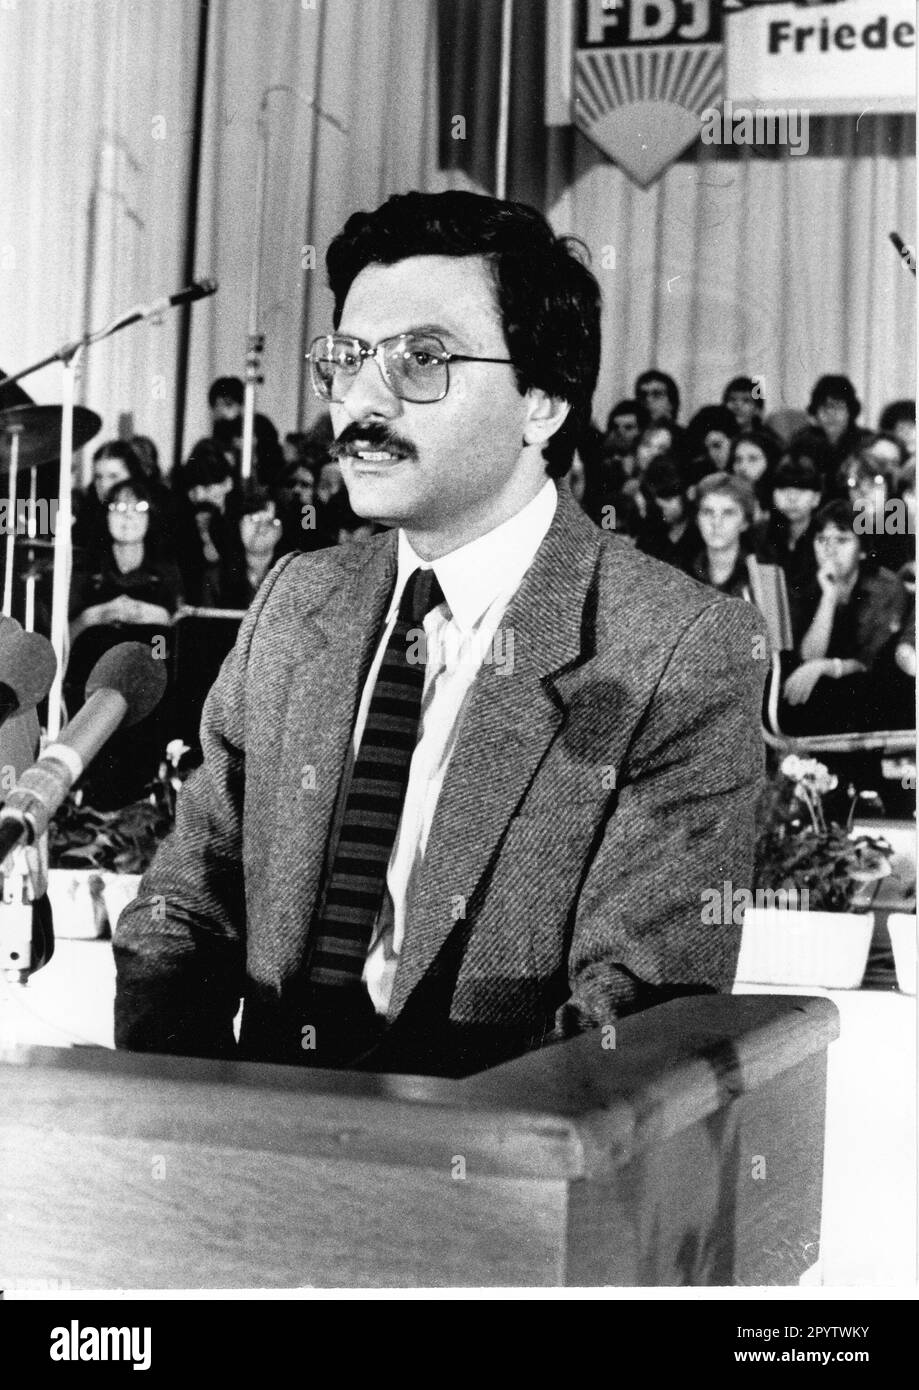 At a meeting on the occasion of the World Youth Day (WBDJ), more than 3,000 Brandenburg FDJ members reaffirmed their commitment to socialism and peace in the Steelworkers' Sports Hall. Walid Masri, President of the World Federation of Democratic Youth, gave a speech. Youth gives a speech. Event.Youth. GDR. Photo:MAZ/Bruno Wernitz, 10.11.1982 [automated translation] Stock Photo